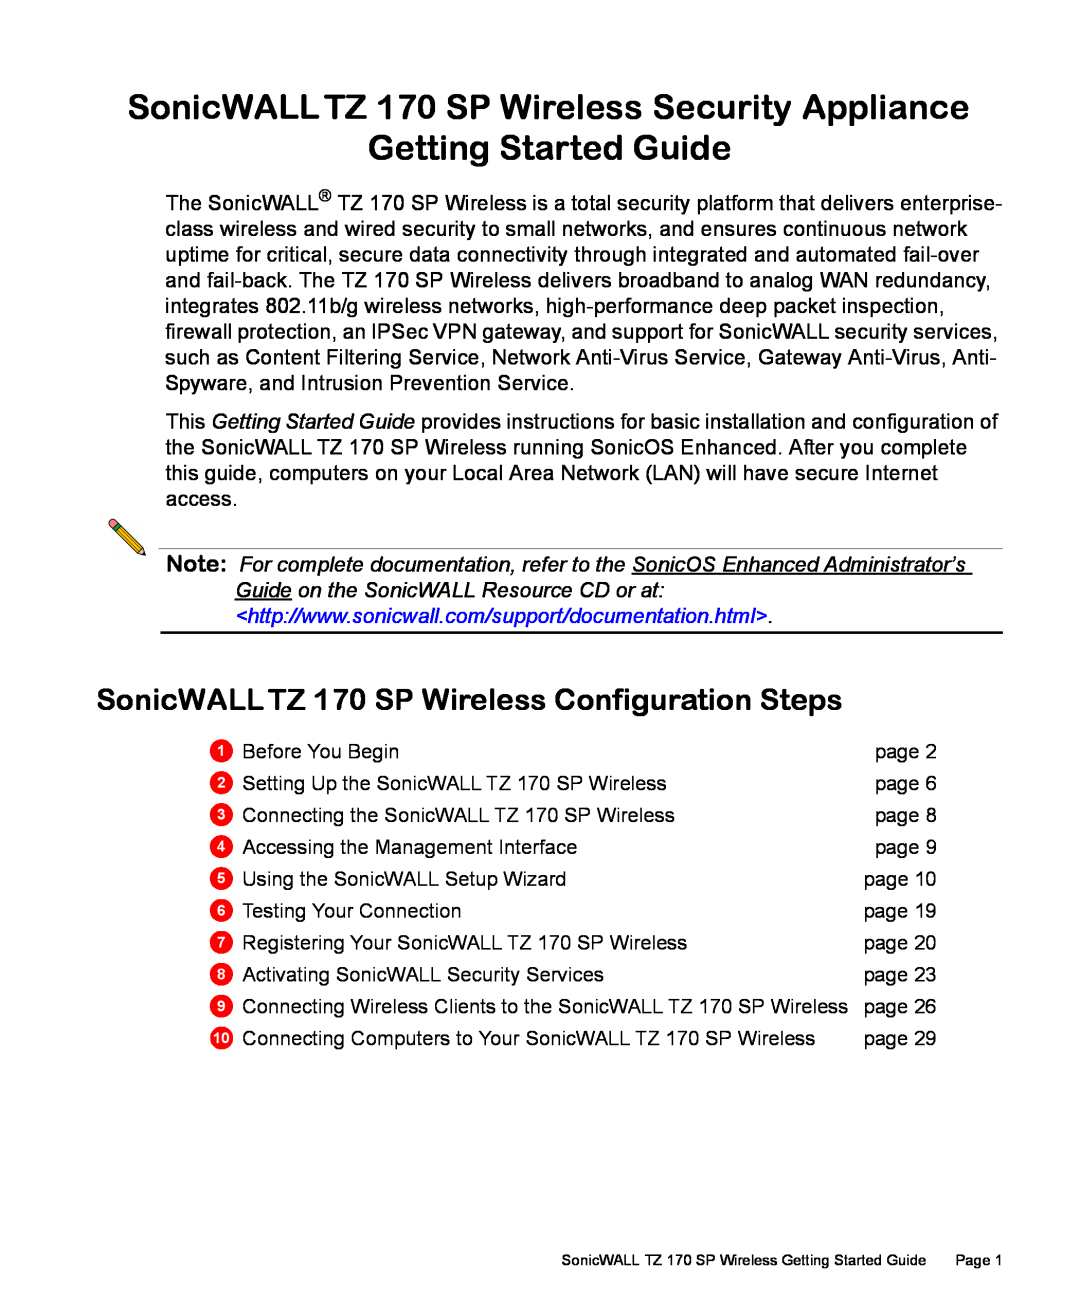 SonicWALL manual SonicWALL TZ 170 SP Wireless Security Appliance, Getting Started Guide 